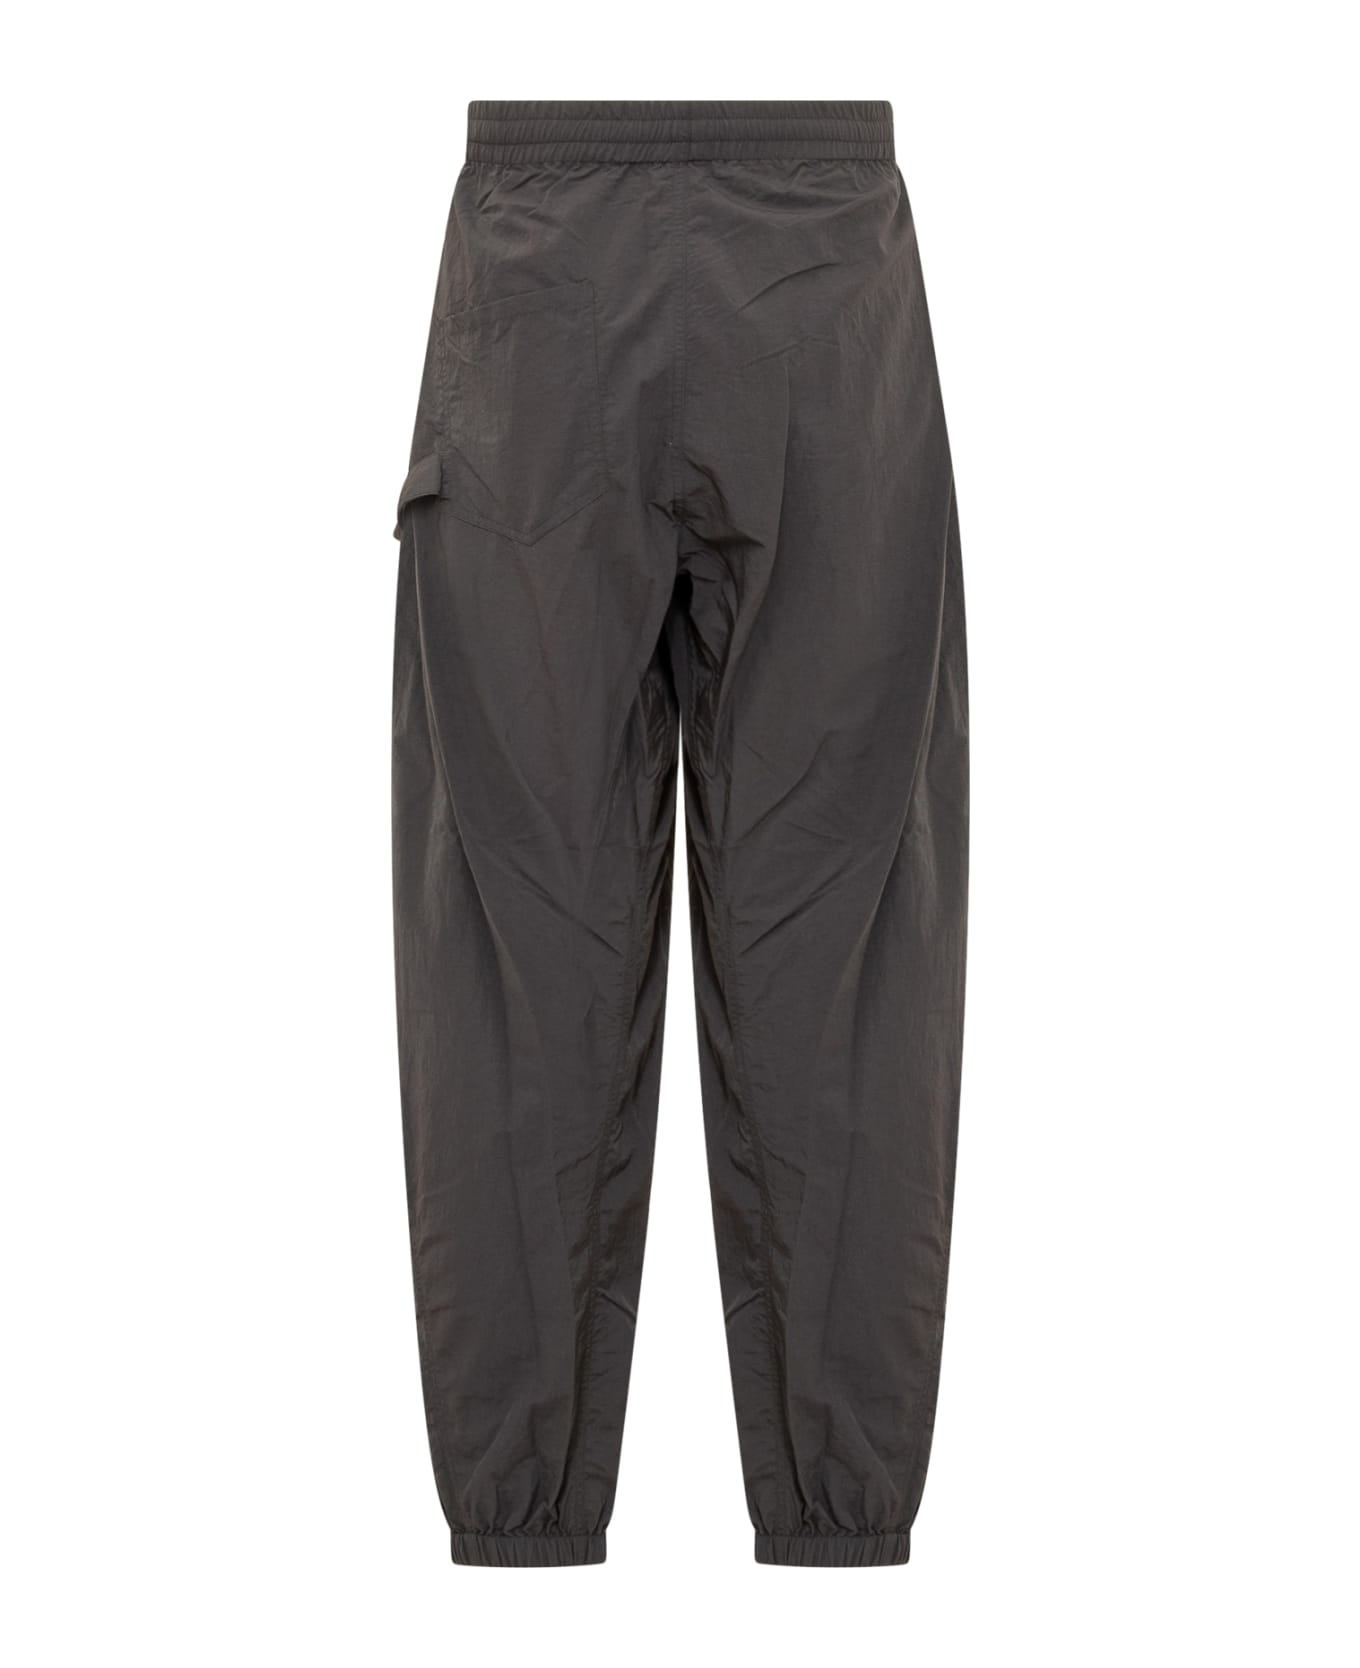 J.W. Anderson Twisted Joggers Pants - BLACK